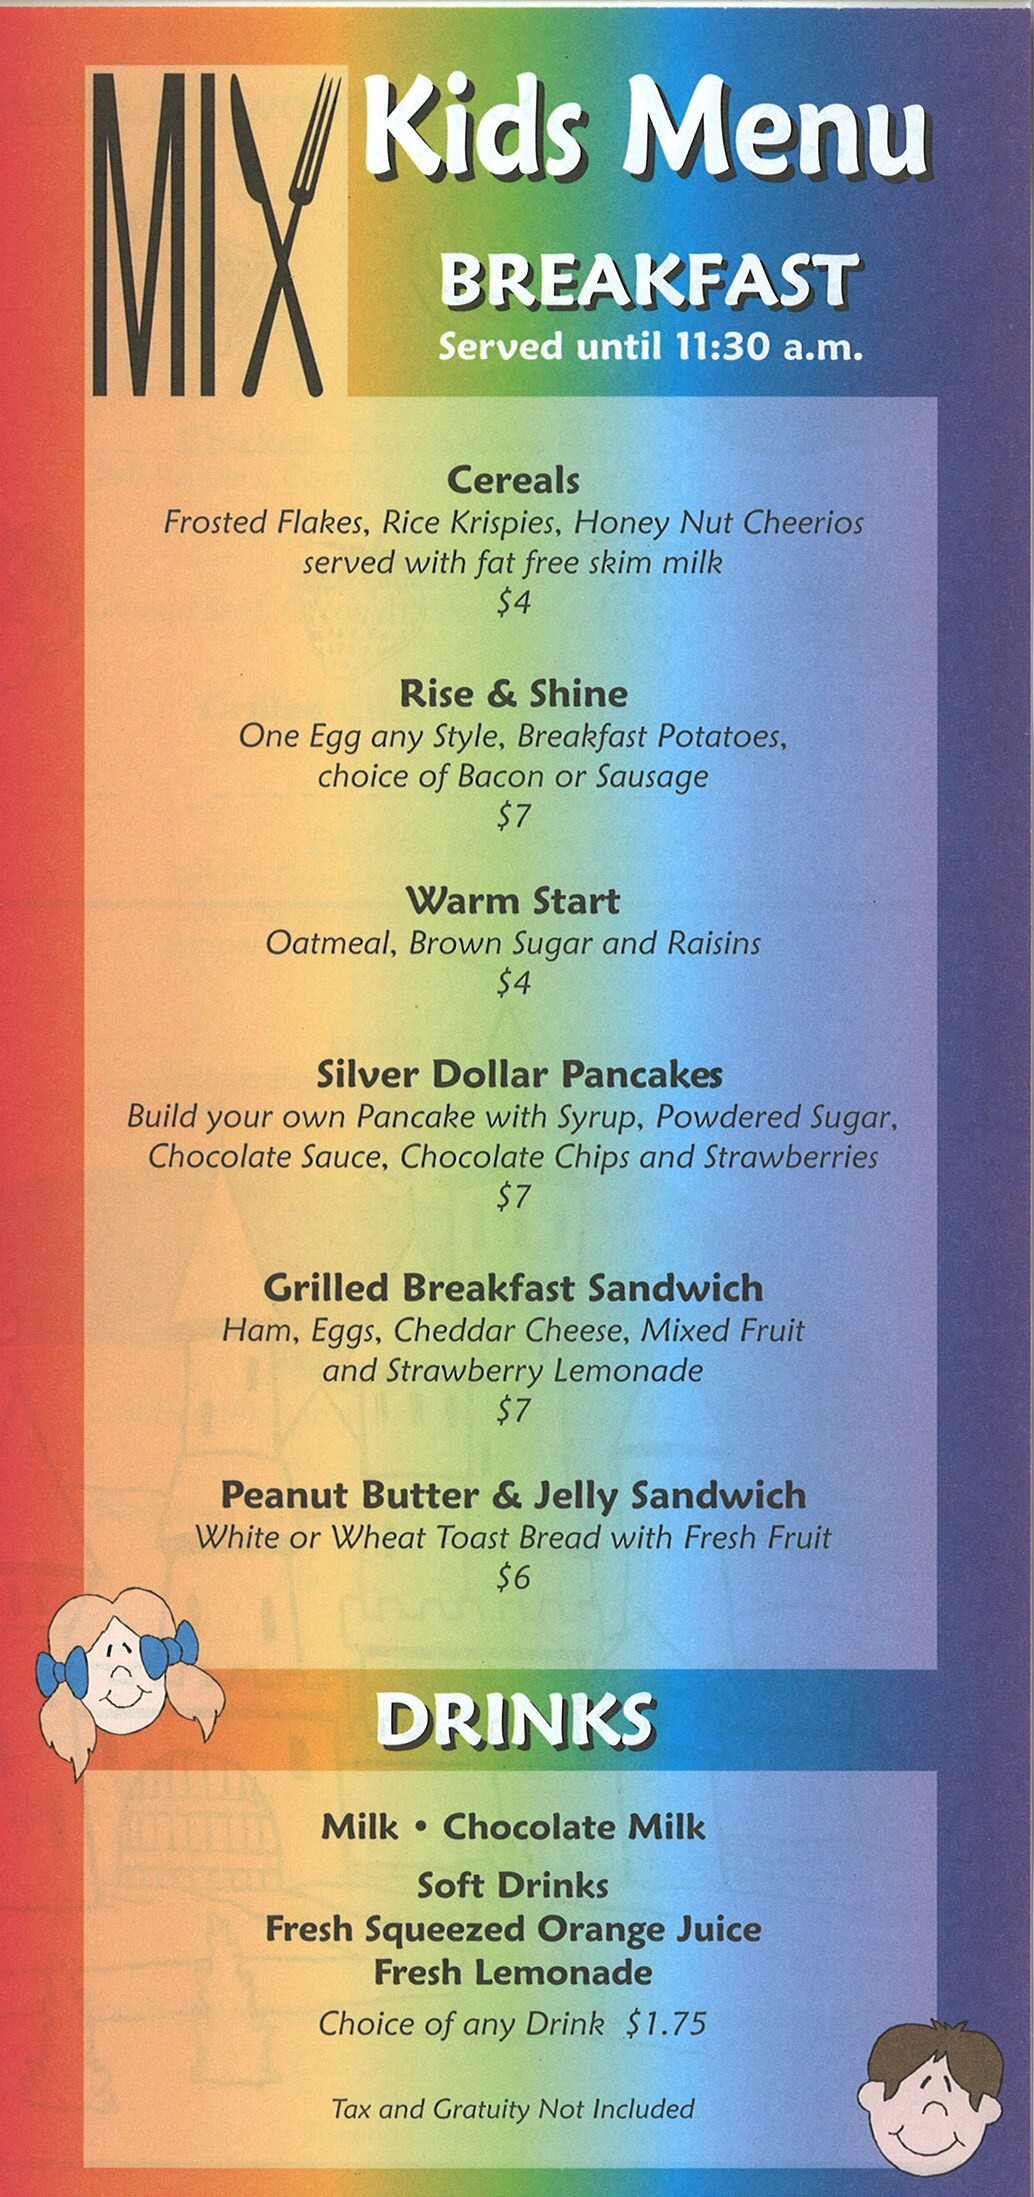 Kids Breakfast Menu
 About our hotel